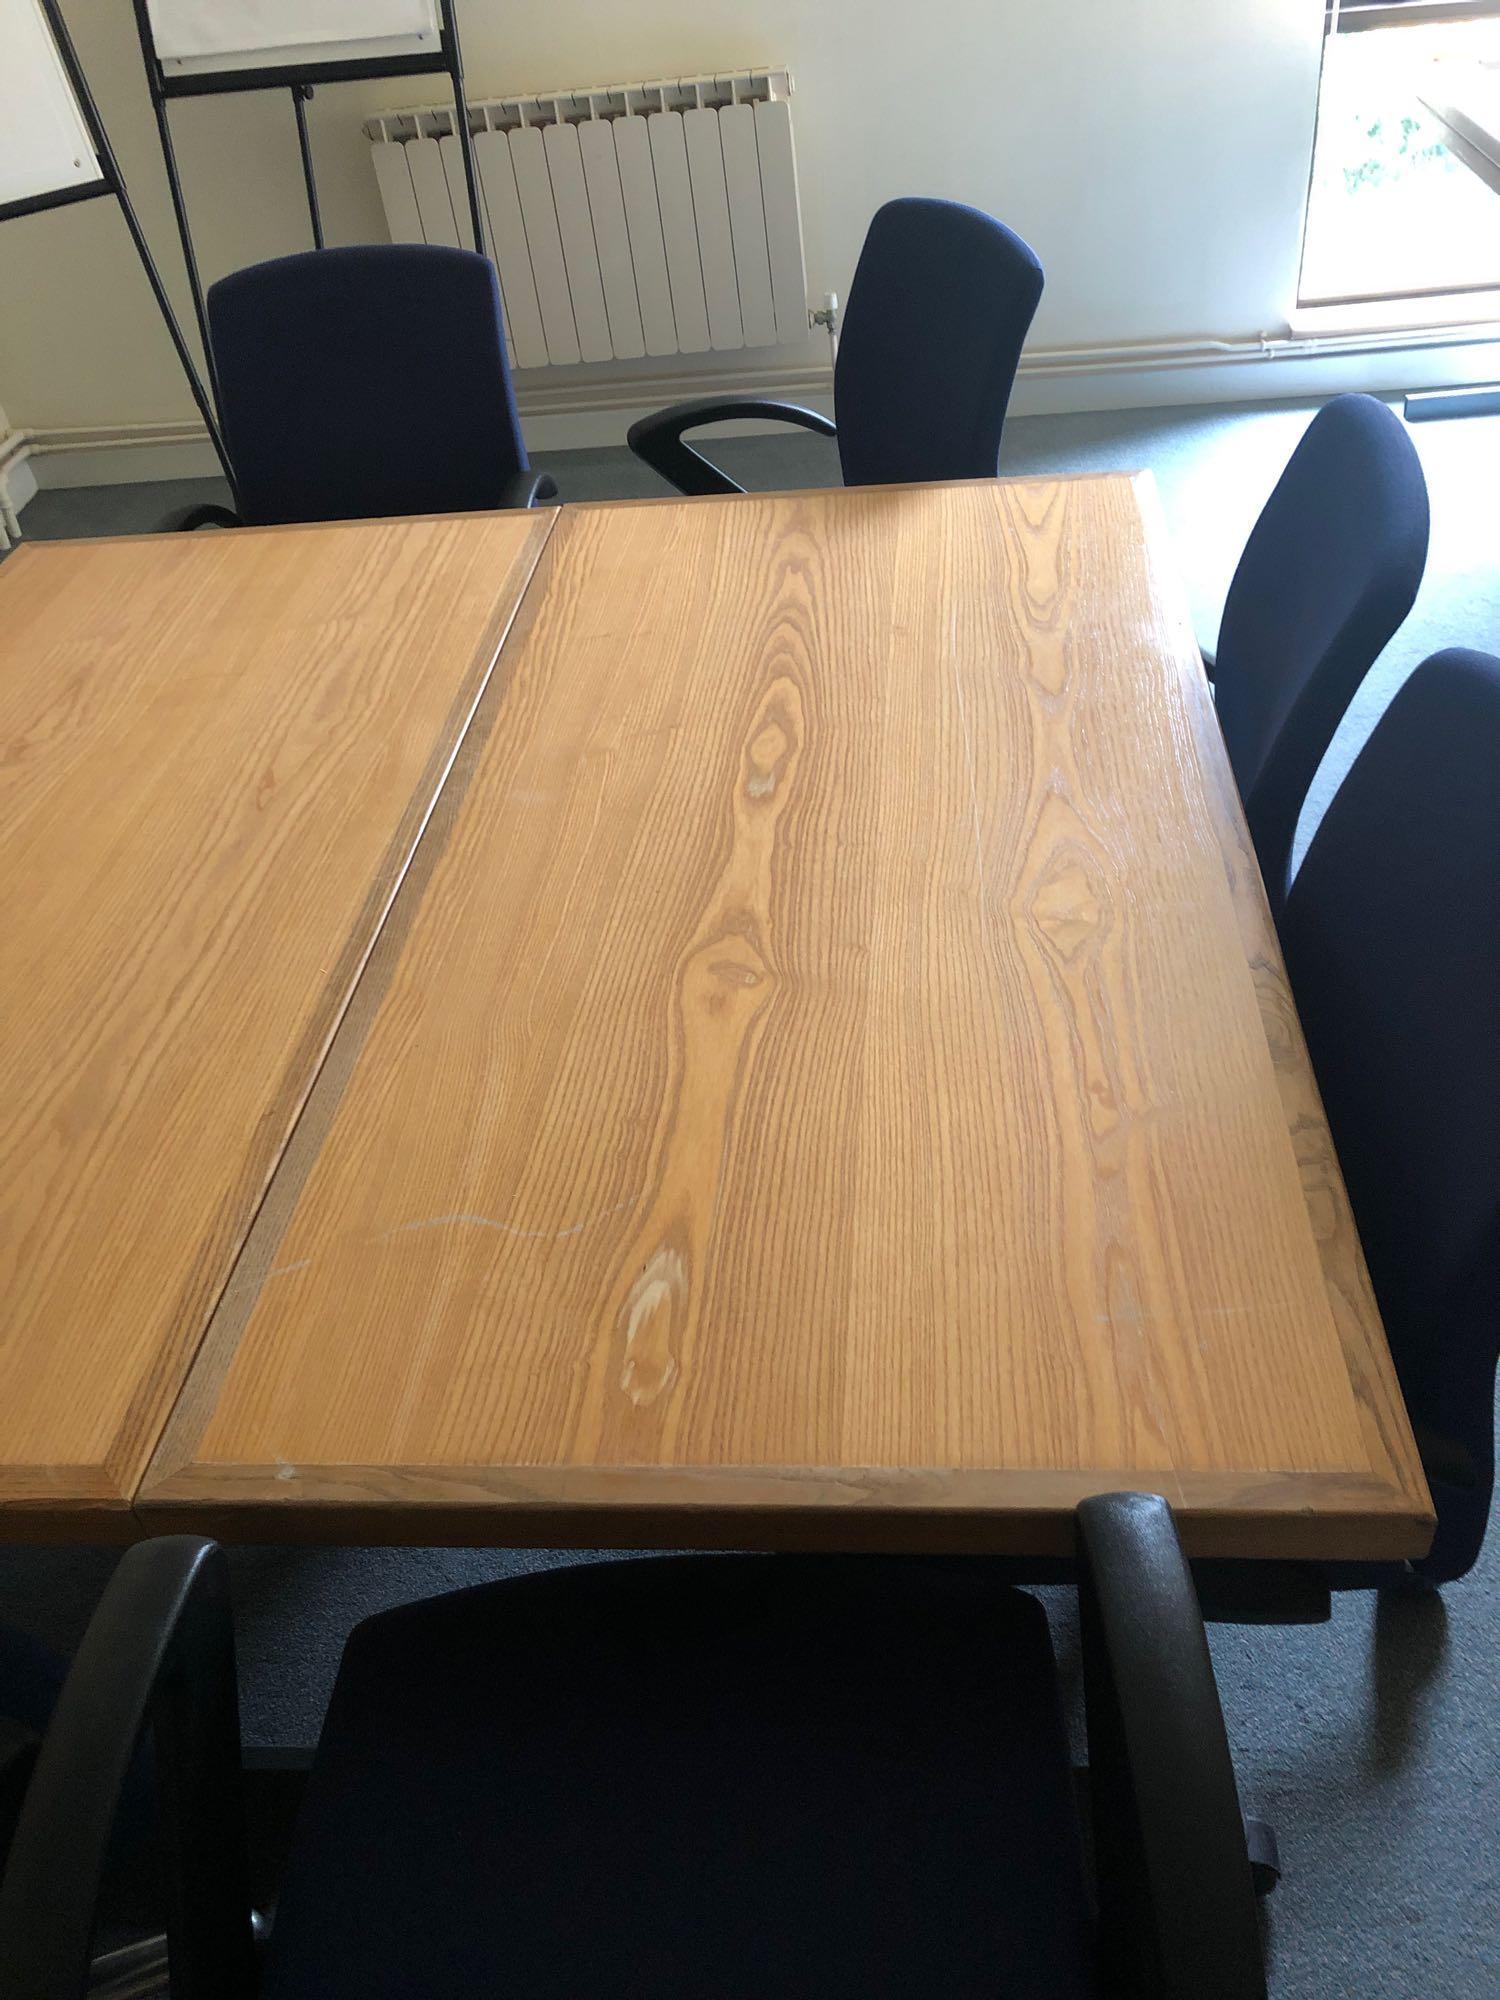 10 x Mas Furniture Contractors Ltd Wooden Conference Tables 1520 x 770mm - Image 2 of 2